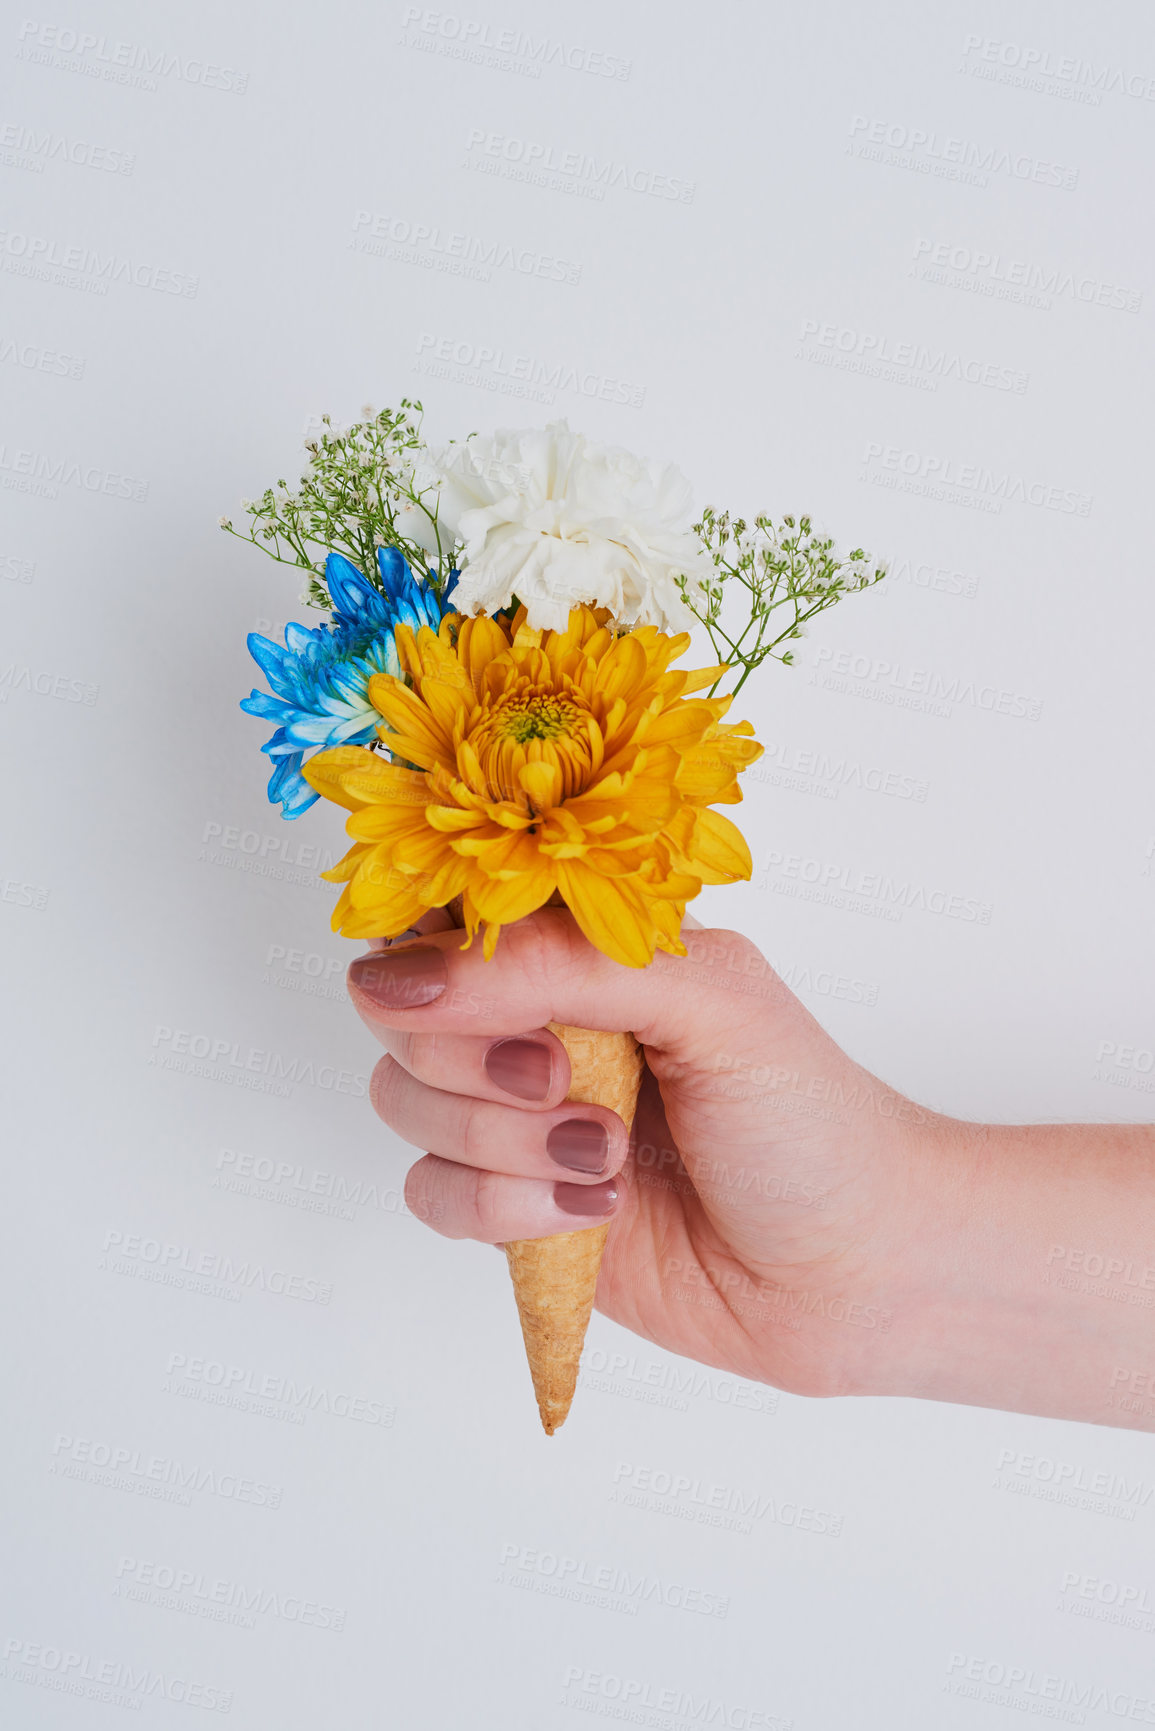 Buy stock photo Cropped shot of an unrecognizable woman holding a cone stuffed with flowers